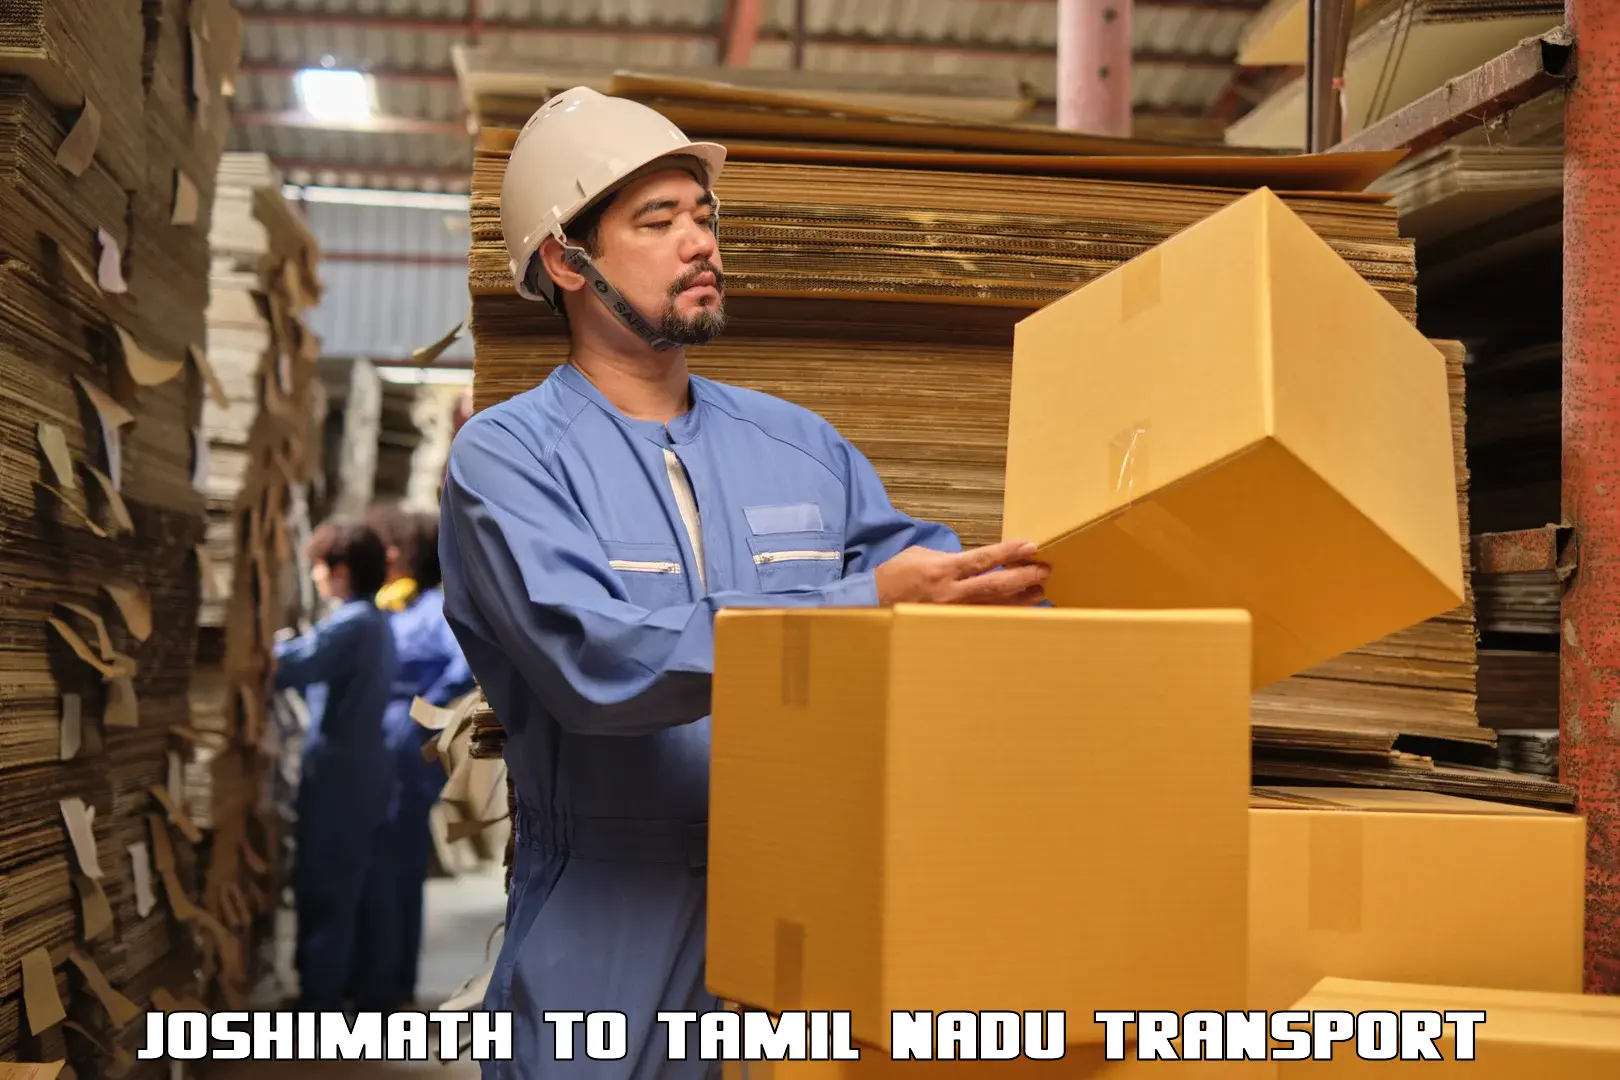 Daily parcel service transport Joshimath to Ennore Port Chennai